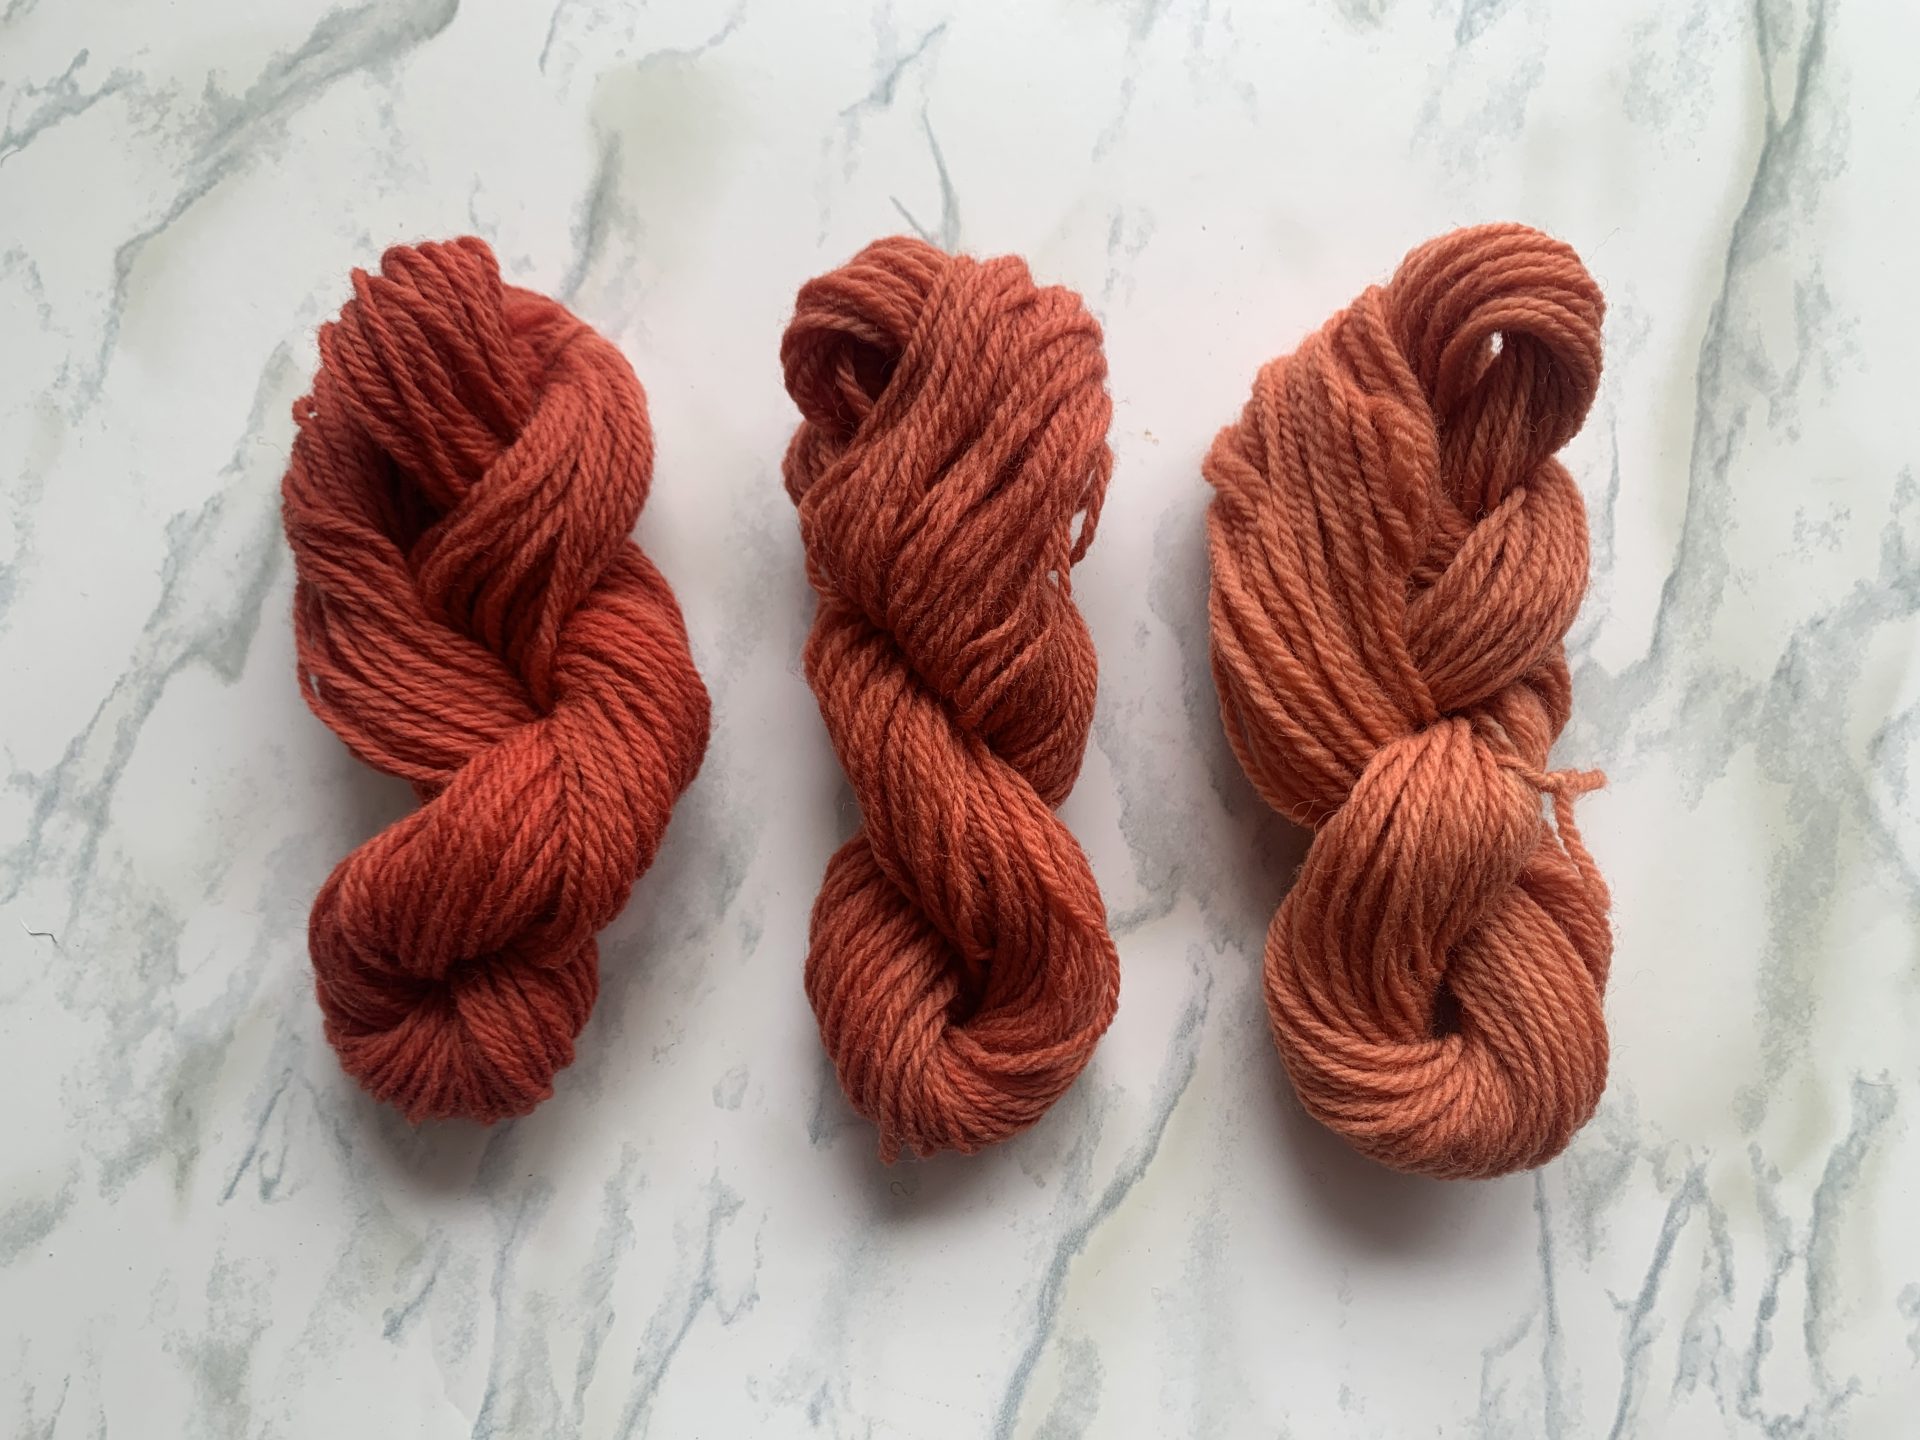 Three red and pink skeins of yarn on a marble background.